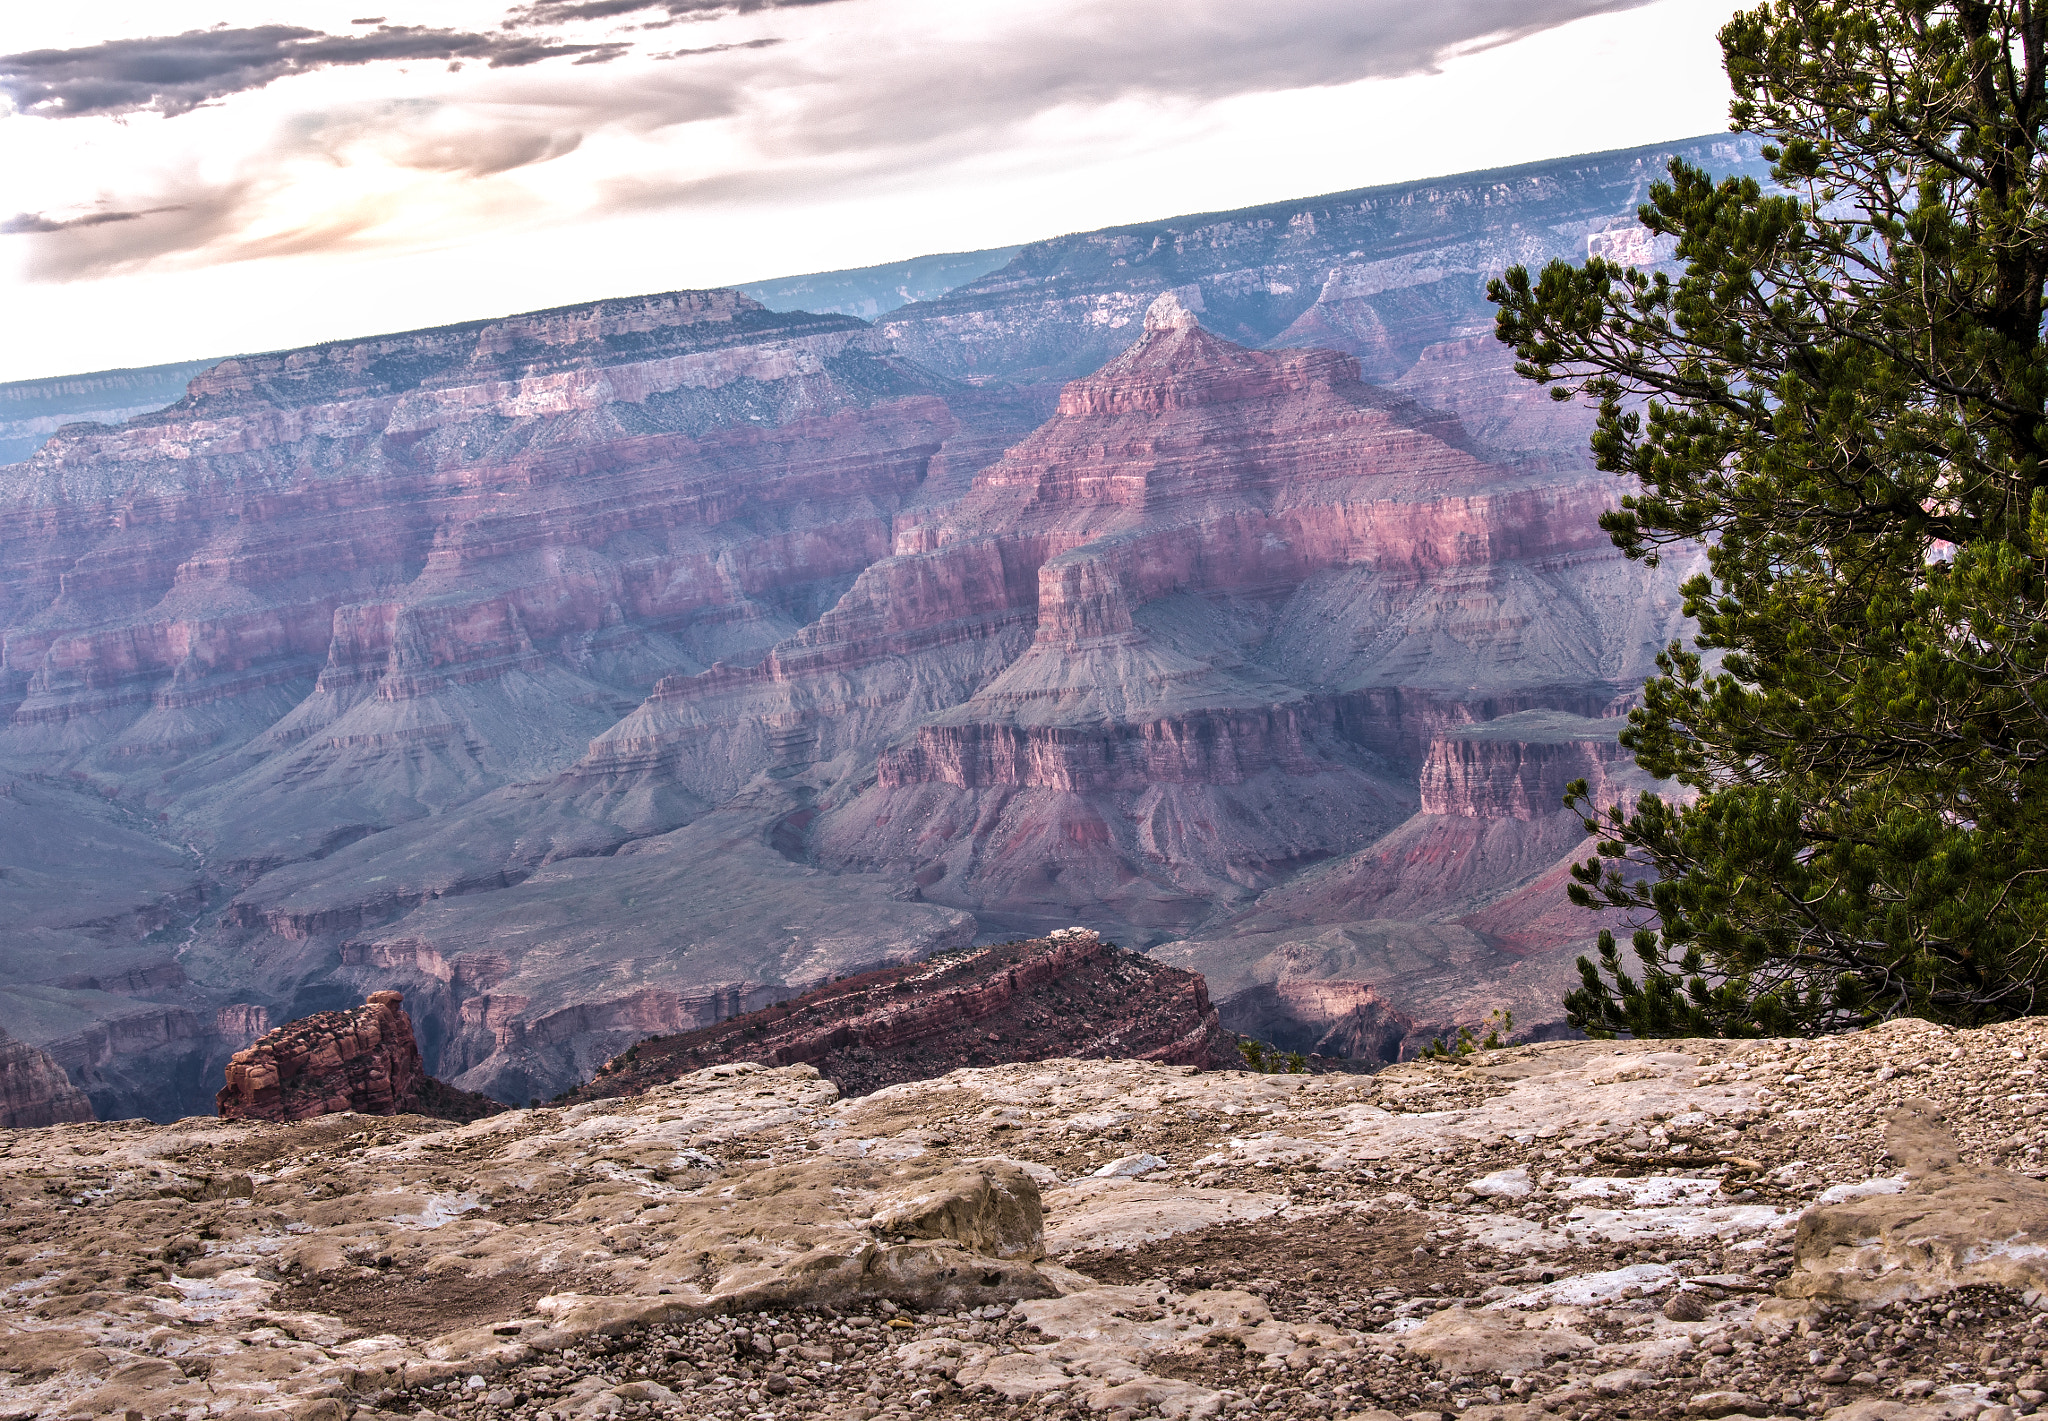 Sony SLT-A55 (SLT-A55V) + Tamron 18-270mm F3.5-6.3 Di II PZD sample photo. My view on grand canyon photography